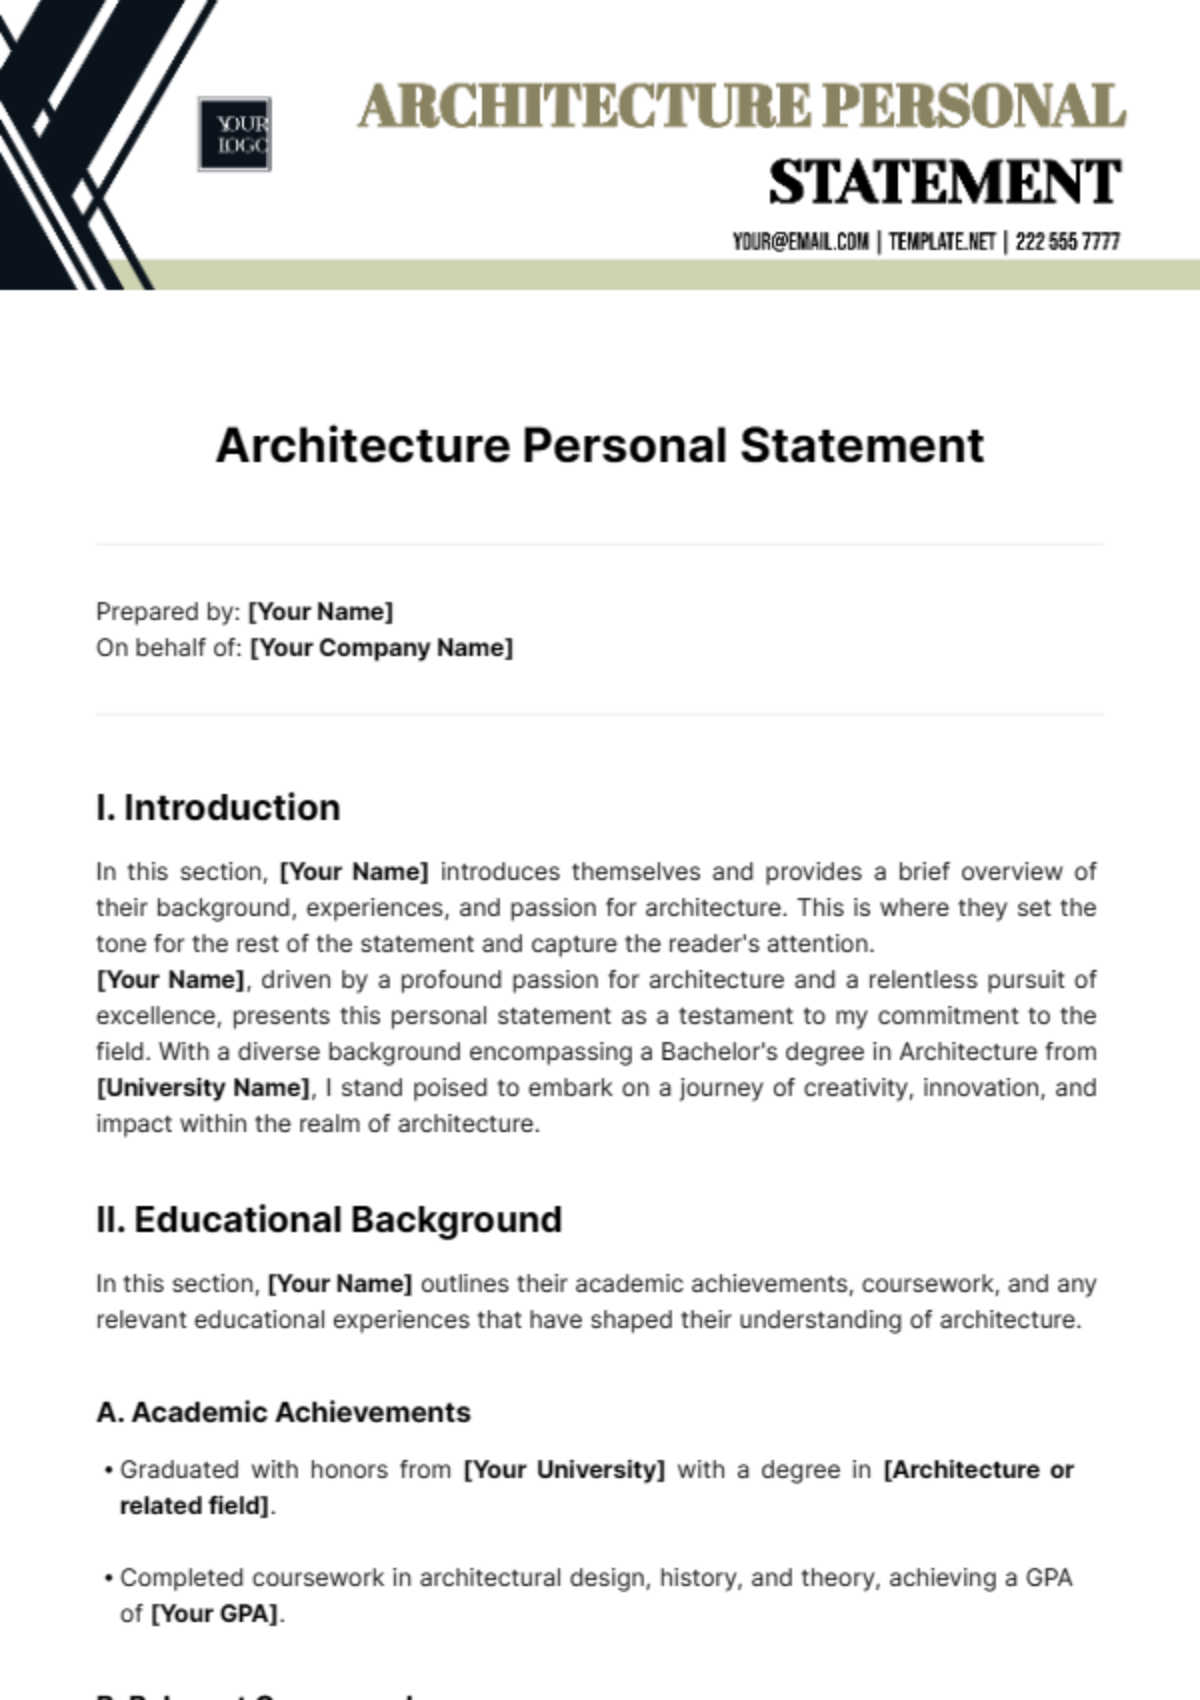 Architecture Personal Statement Template